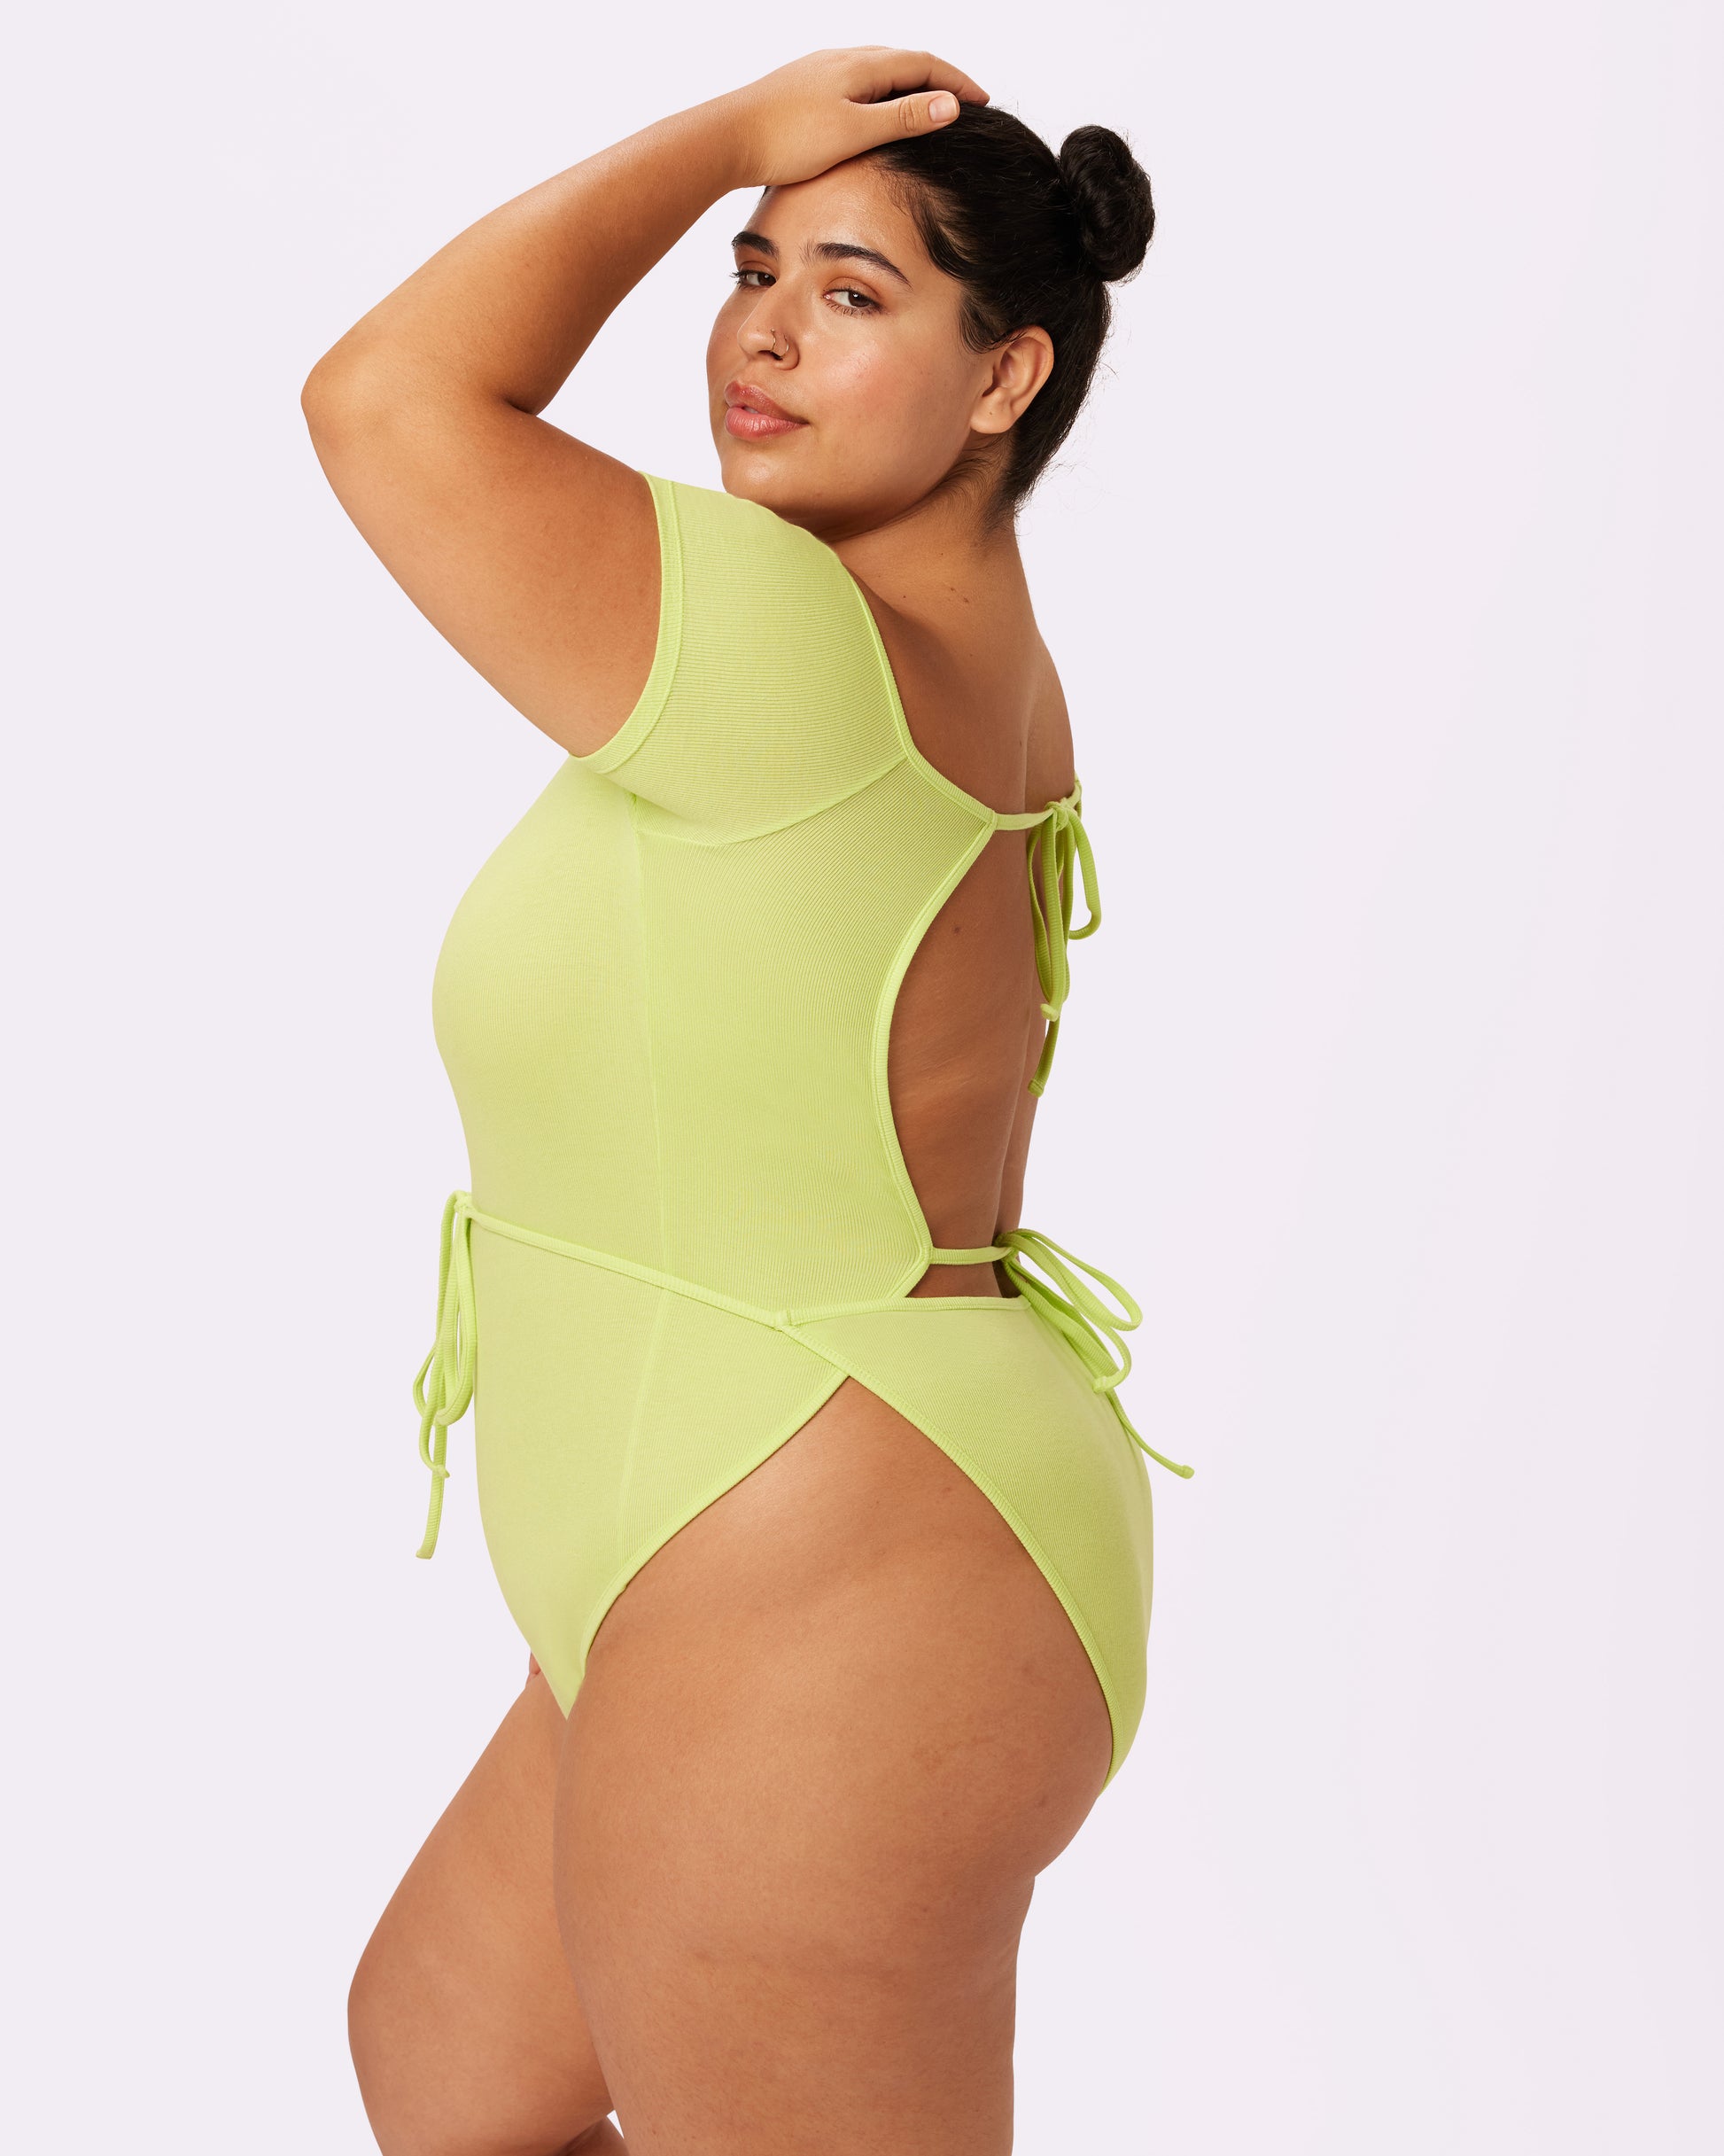 Buy AFRM Brami Bodysuit In Fuchsia,green - Mixed Floral Sub At 19